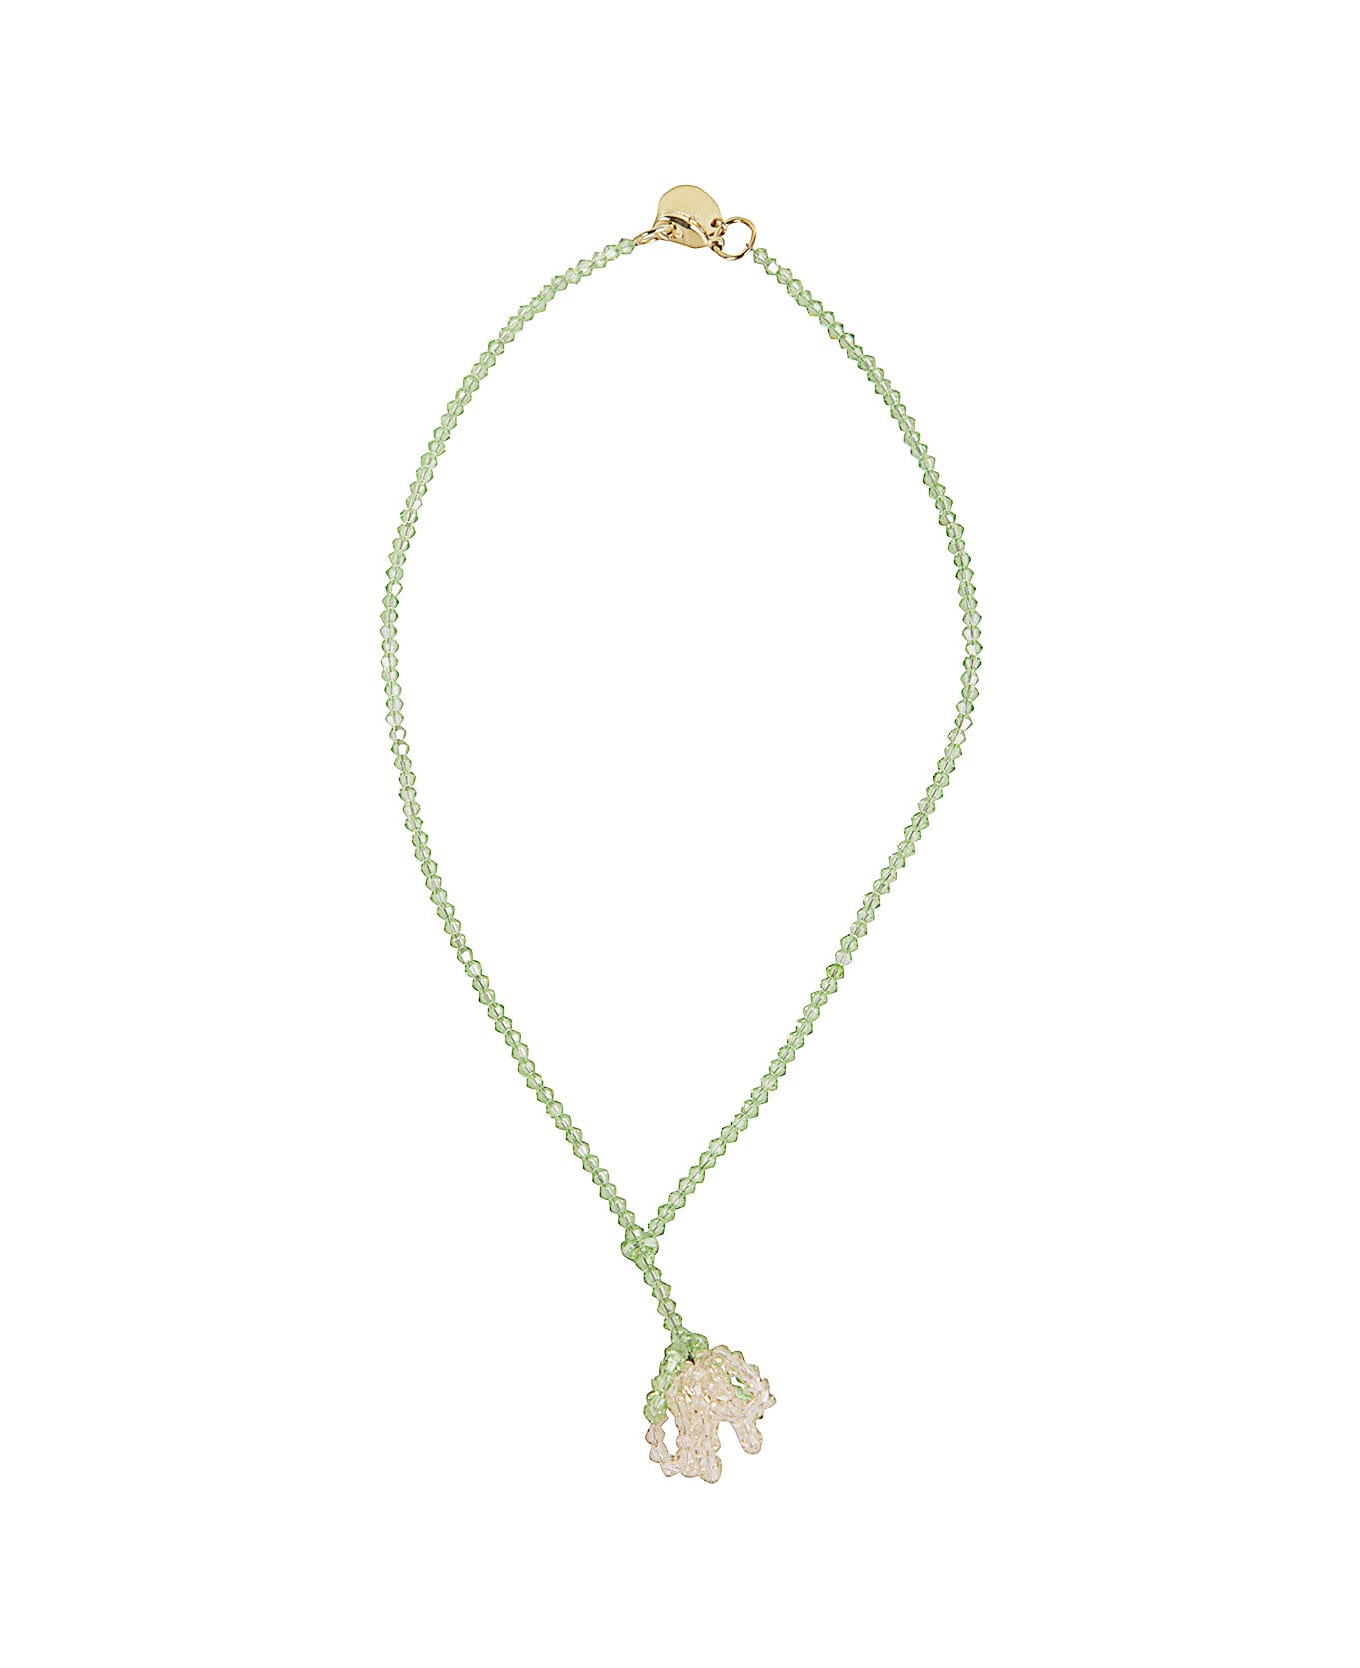 Simone Rocha Cluster Crystal Flower Necklace - Nude Mint